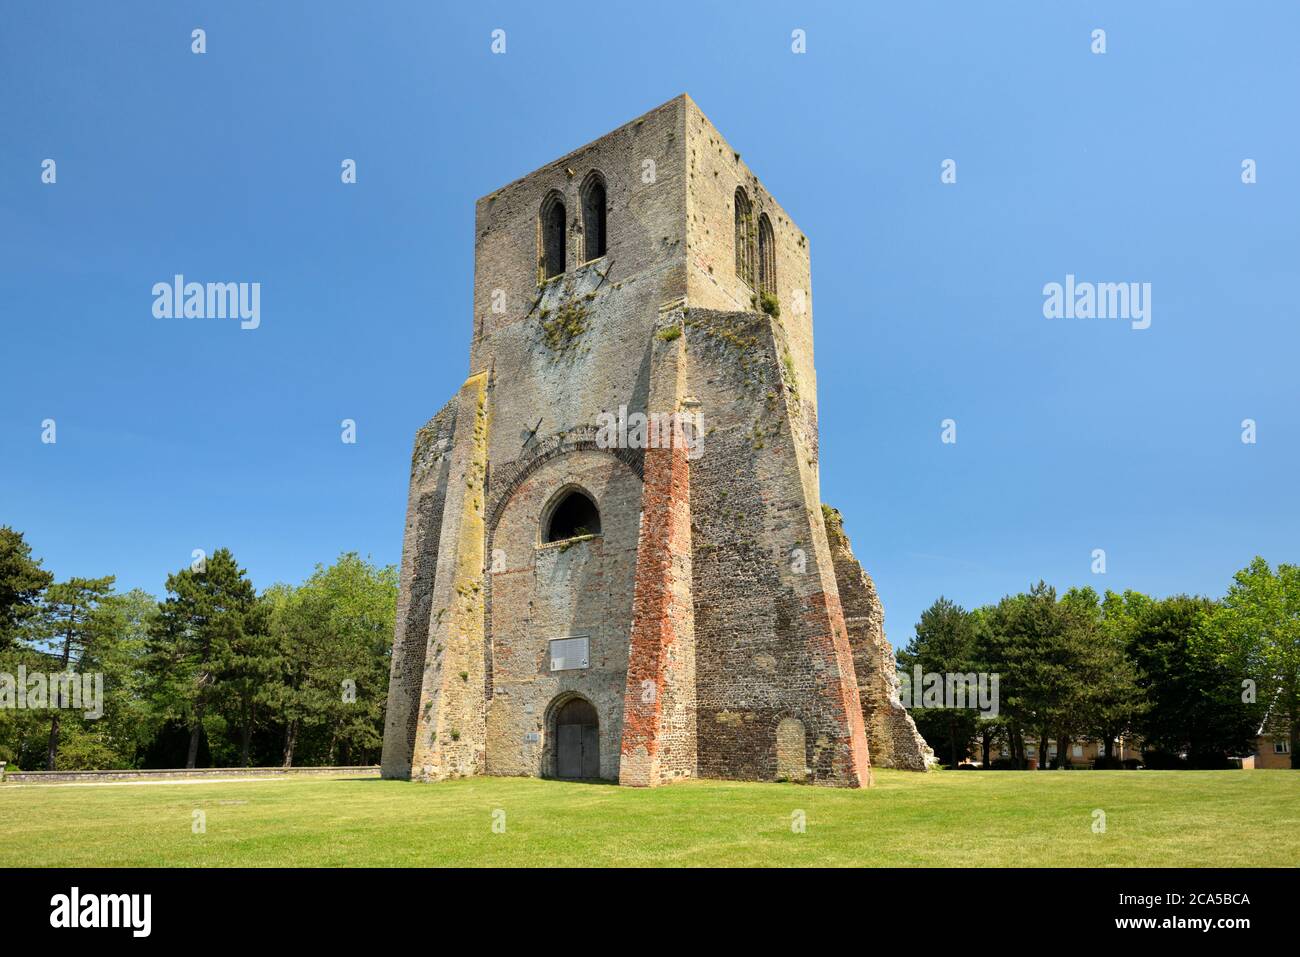 France, Nord, Bergues, tower carree from the 12 century vestige of the Abbey of Saint Winoc destroyed in 1789 Stock Photo